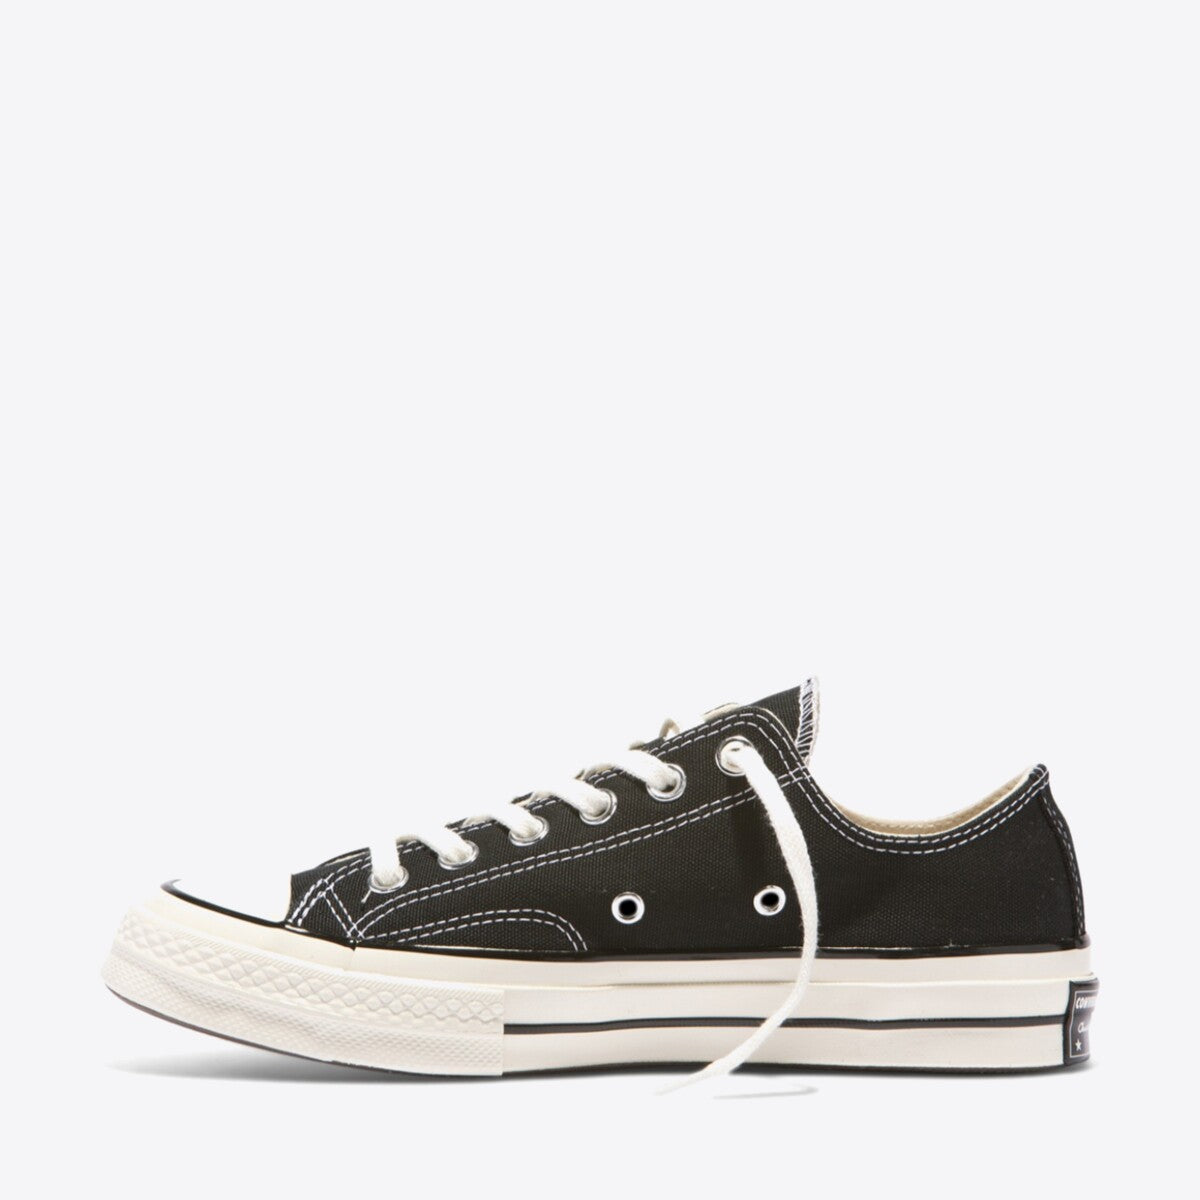 CONVERSE Chuck Taylor All Star 70 Canvas Low Black - Image 4